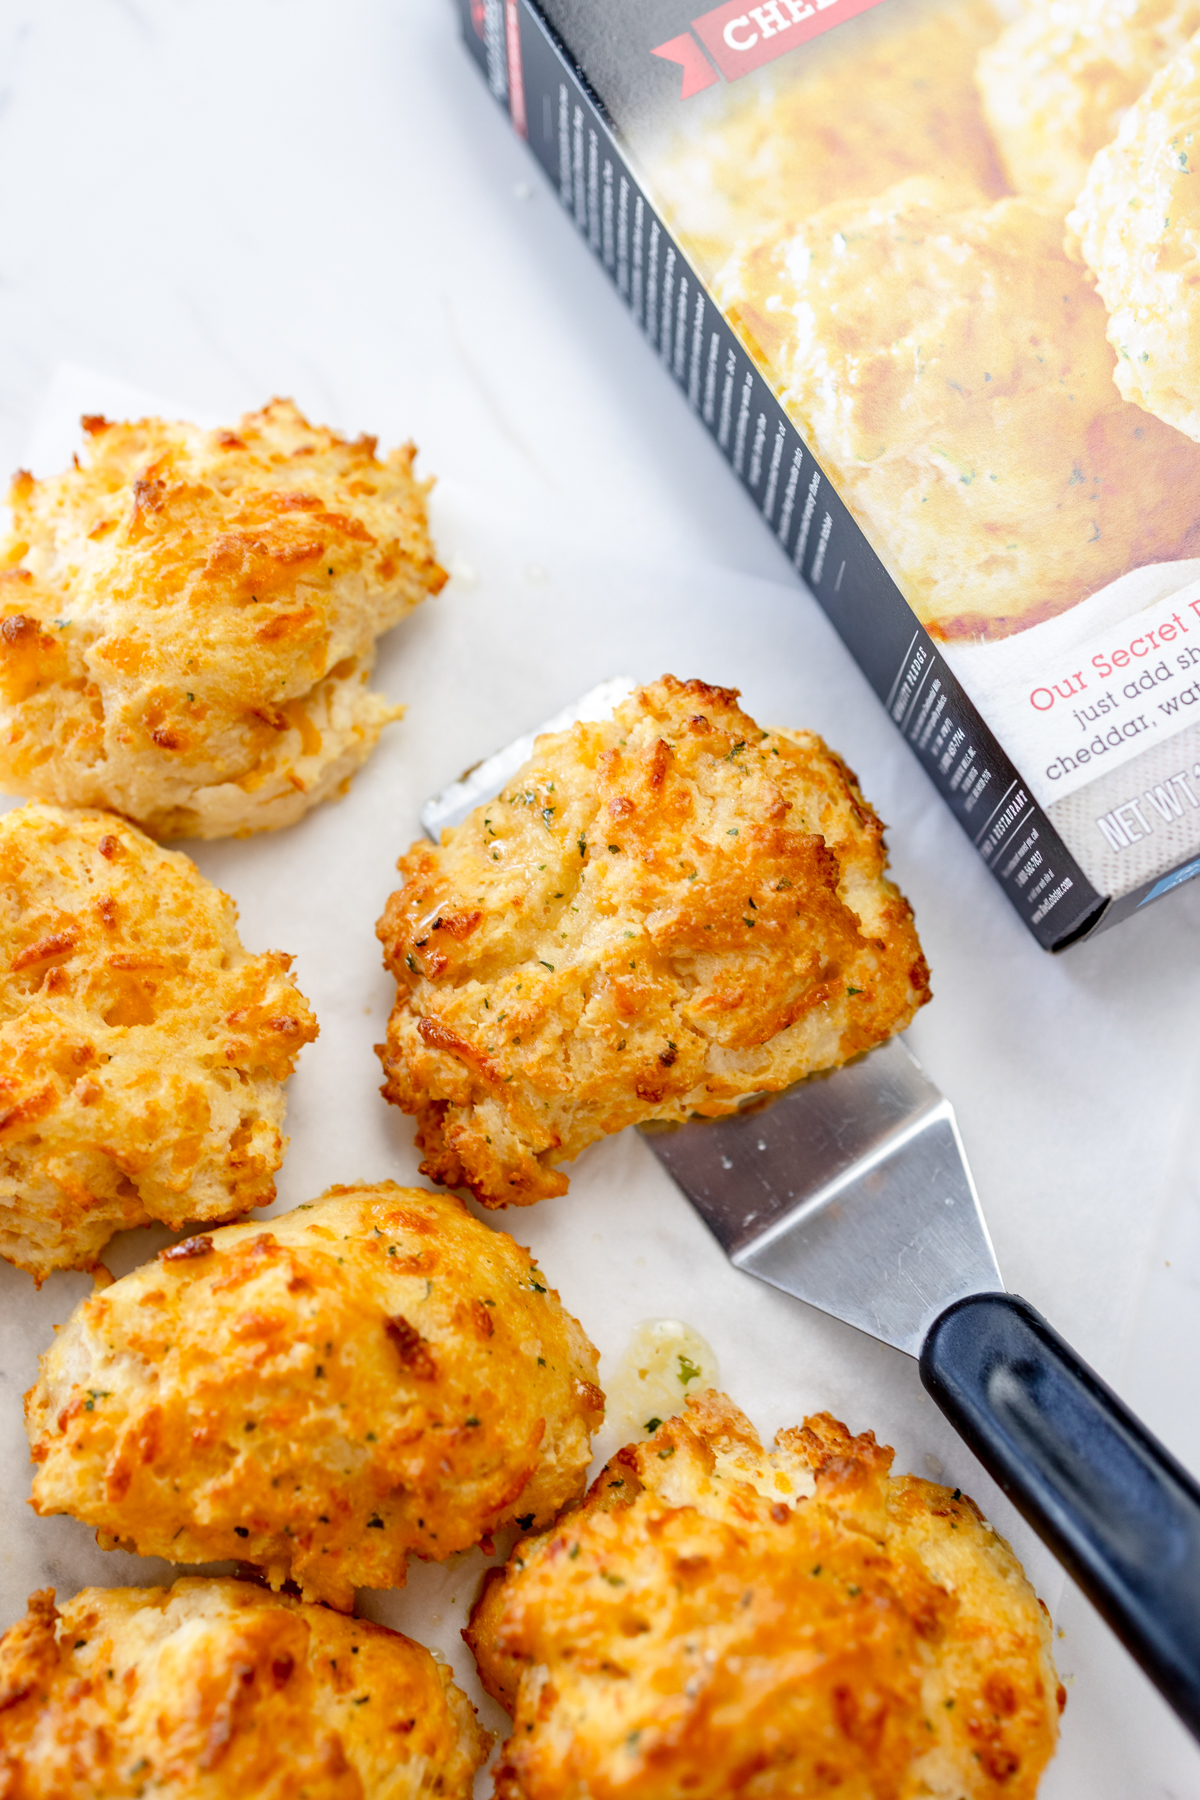 Top view of Red Lobster Cheddar Bay Biscuits on a white surface, one being scooped up with a spatula.